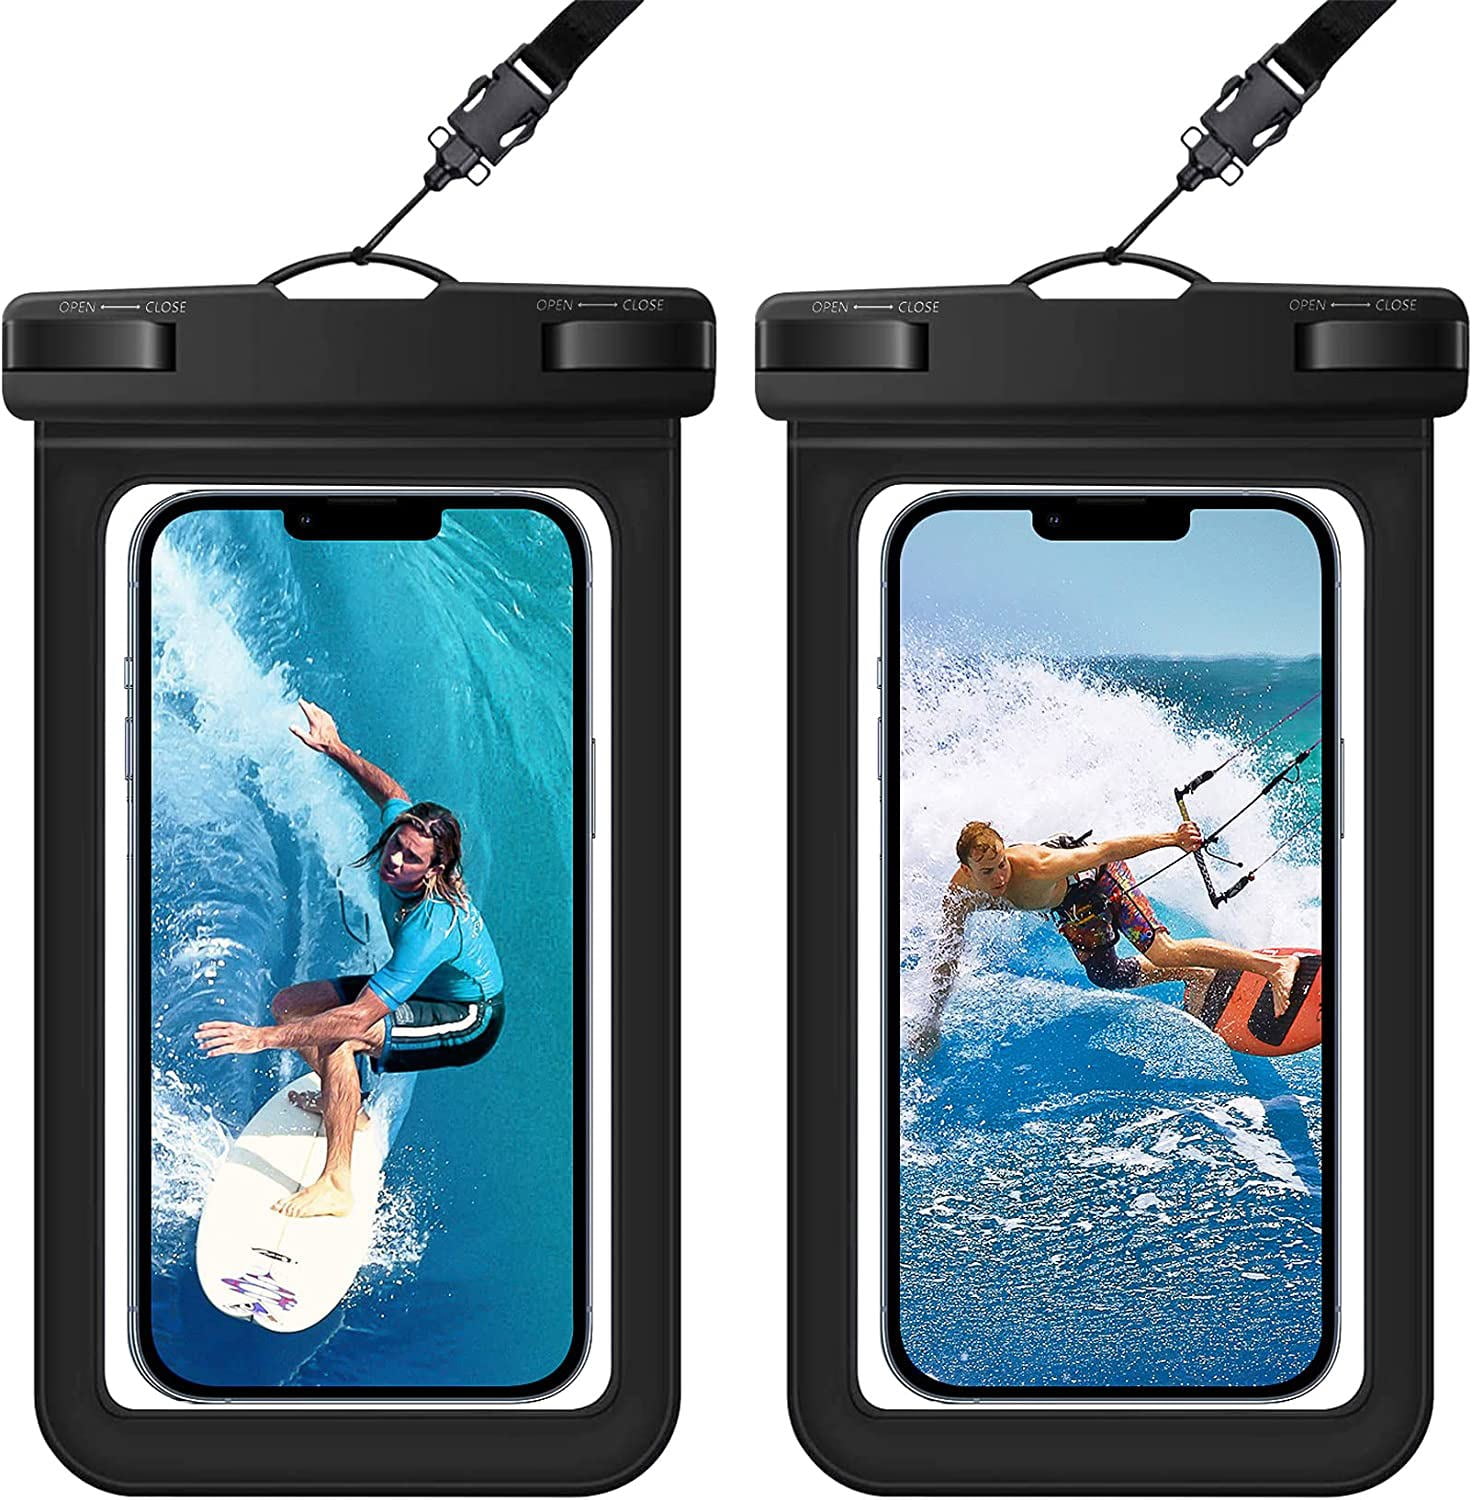 Universal Waterproof Case,Waterproof Phone Pouch Compatible for iPhone 12 Pro 11 Pro Max XS Max XR X 8 7 Samsung Galaxy s10/s9 Google Pixel 2 HTC Up to 7.0 IPX8 Cellphone Dry Bag 4 Pack 